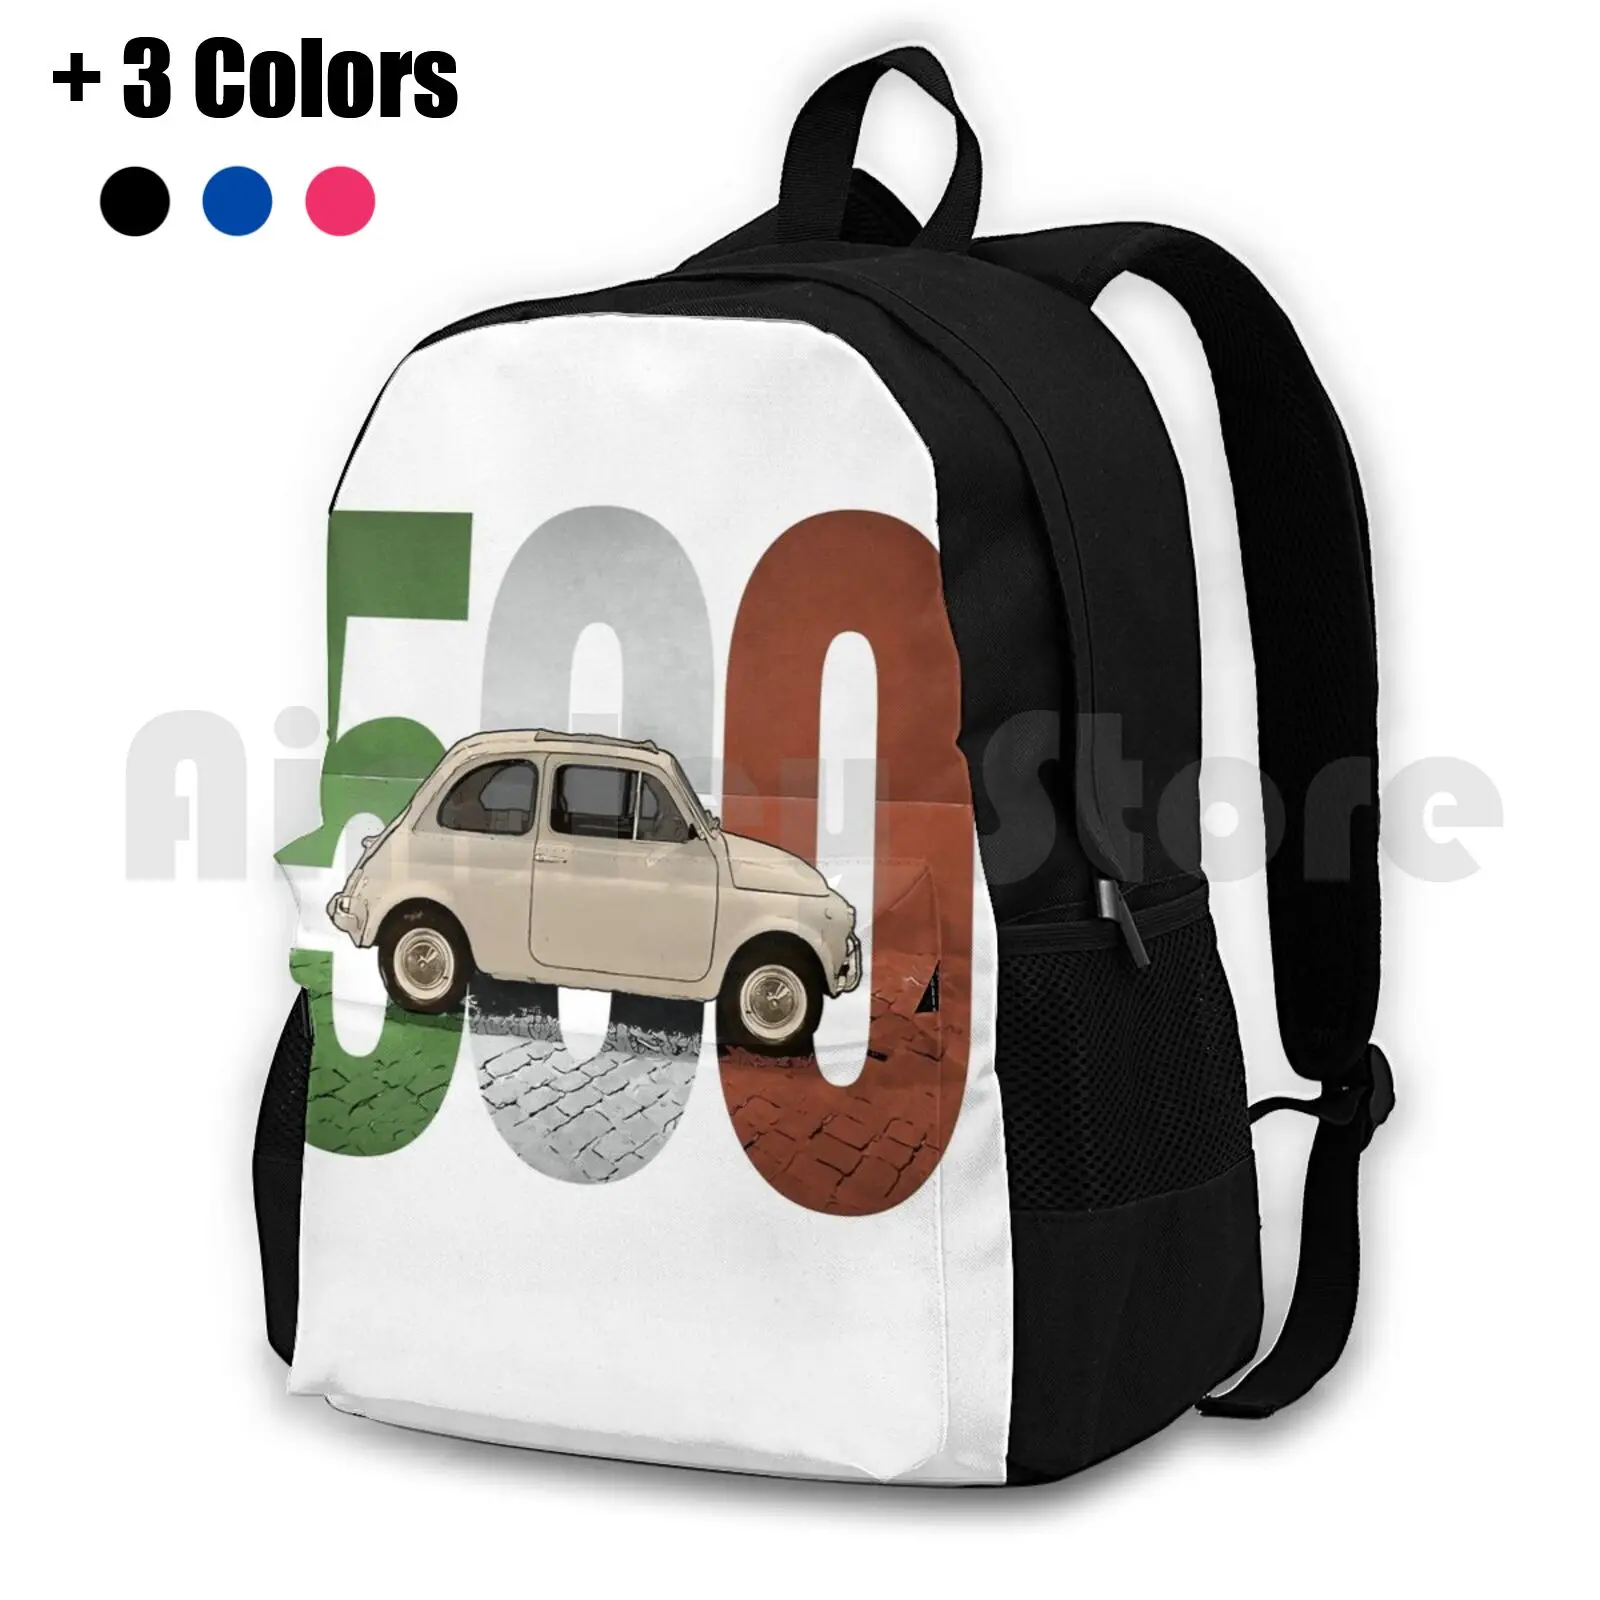 The Classic Fiat 500 On White Outdoor Hiking Backpack Riding Climbing  Sports Bag Fiat 500 Classic Fiat 500 500 Italian Car Fiat - AliExpress